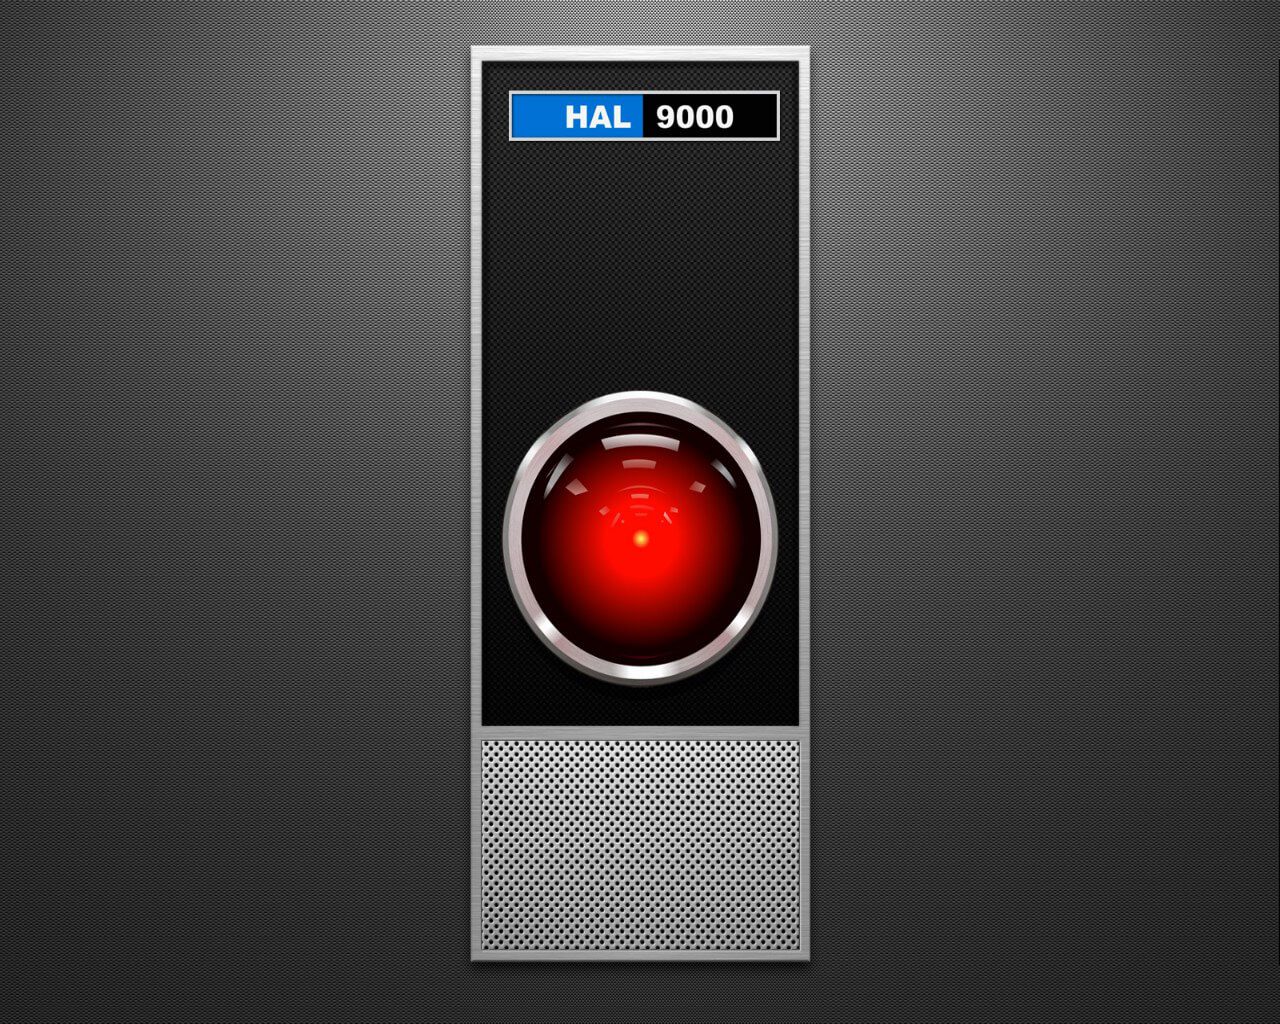 who voiced hal 9000